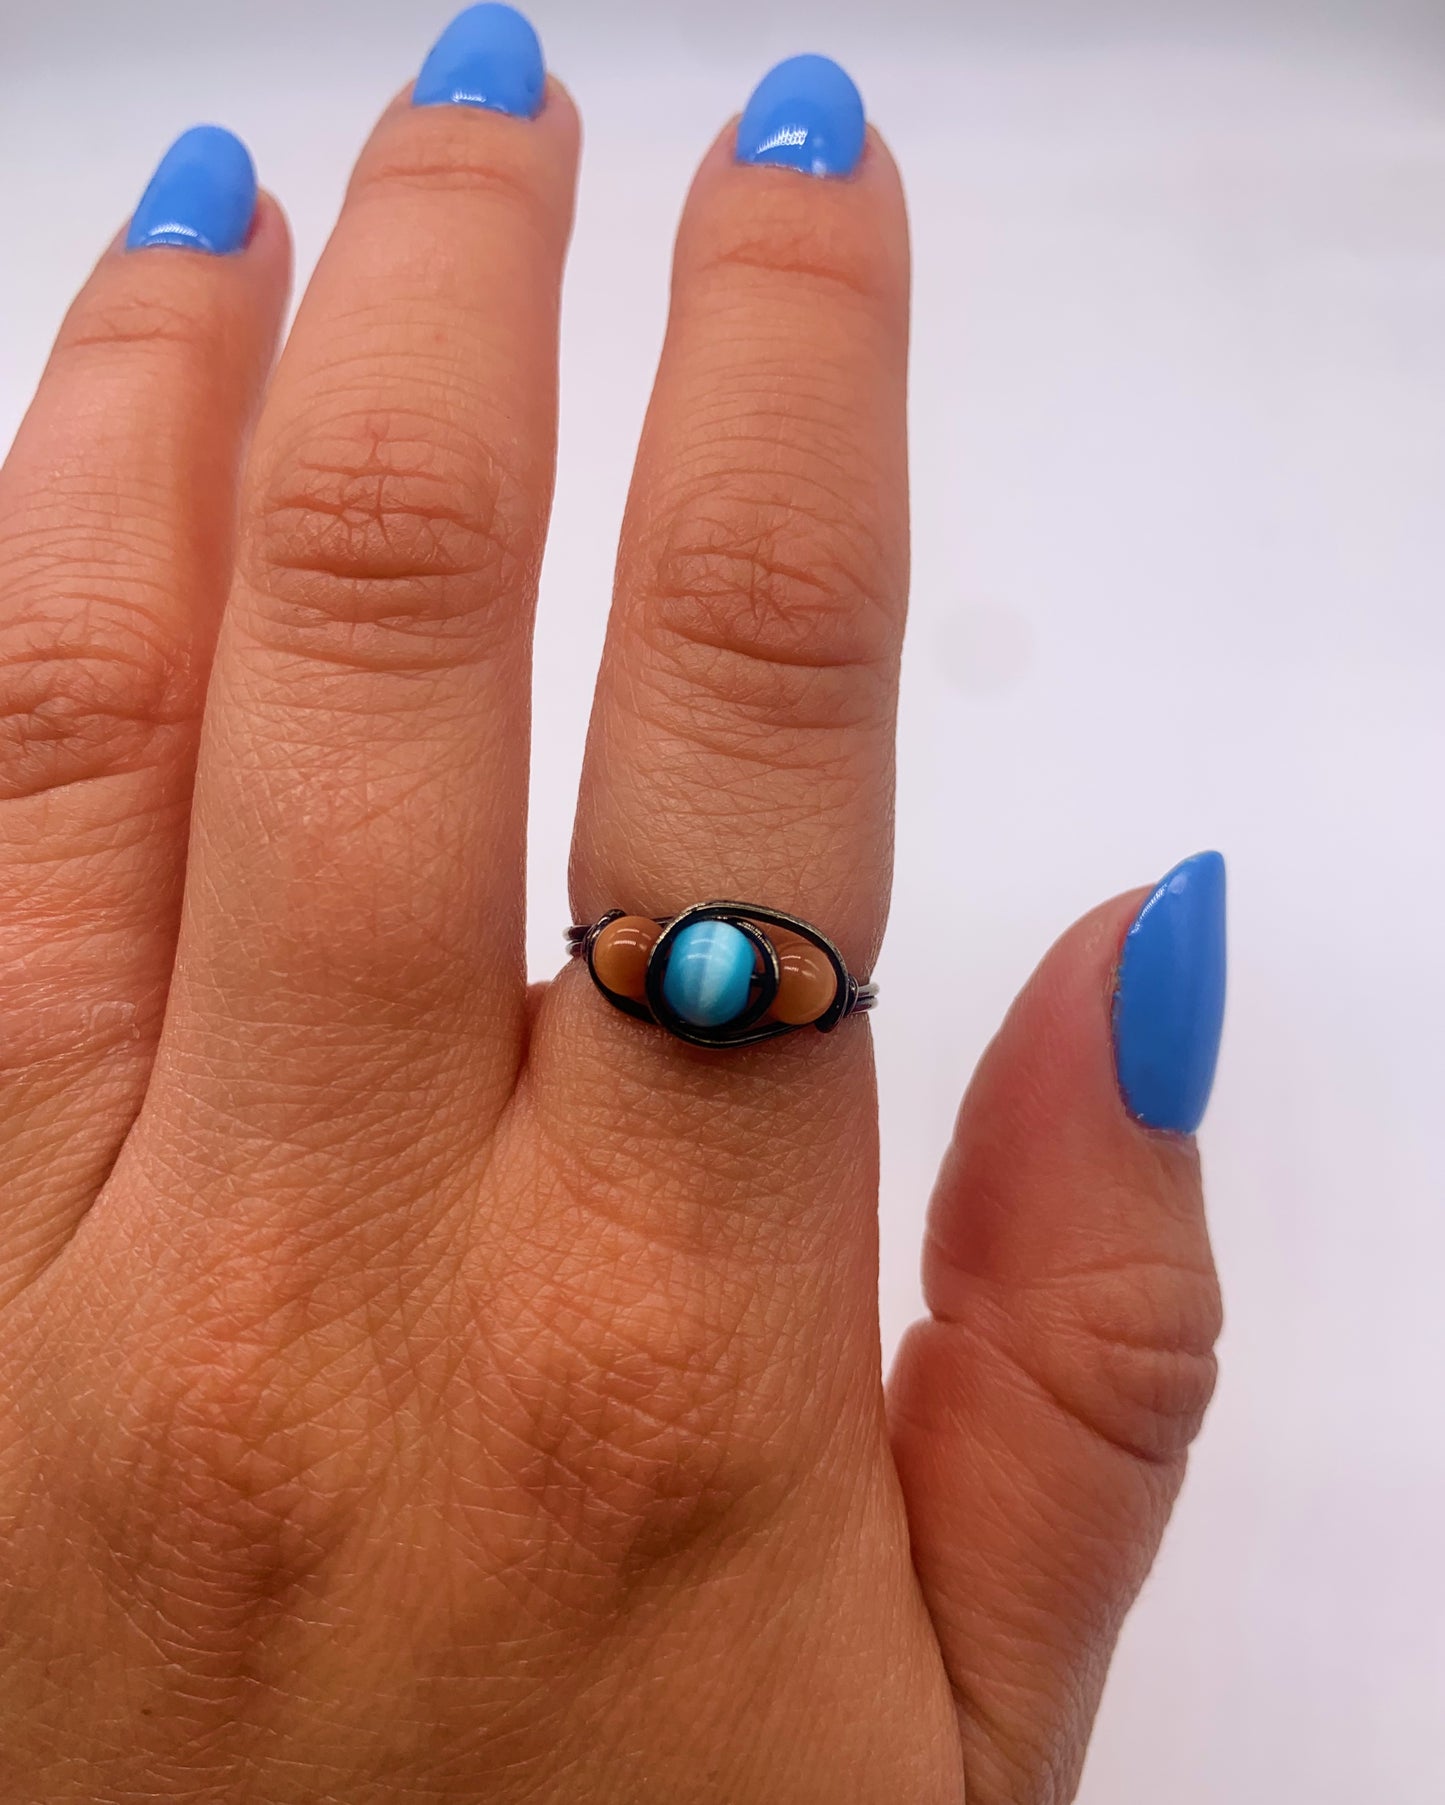 TURQUOISE & CORAL BEAD RING